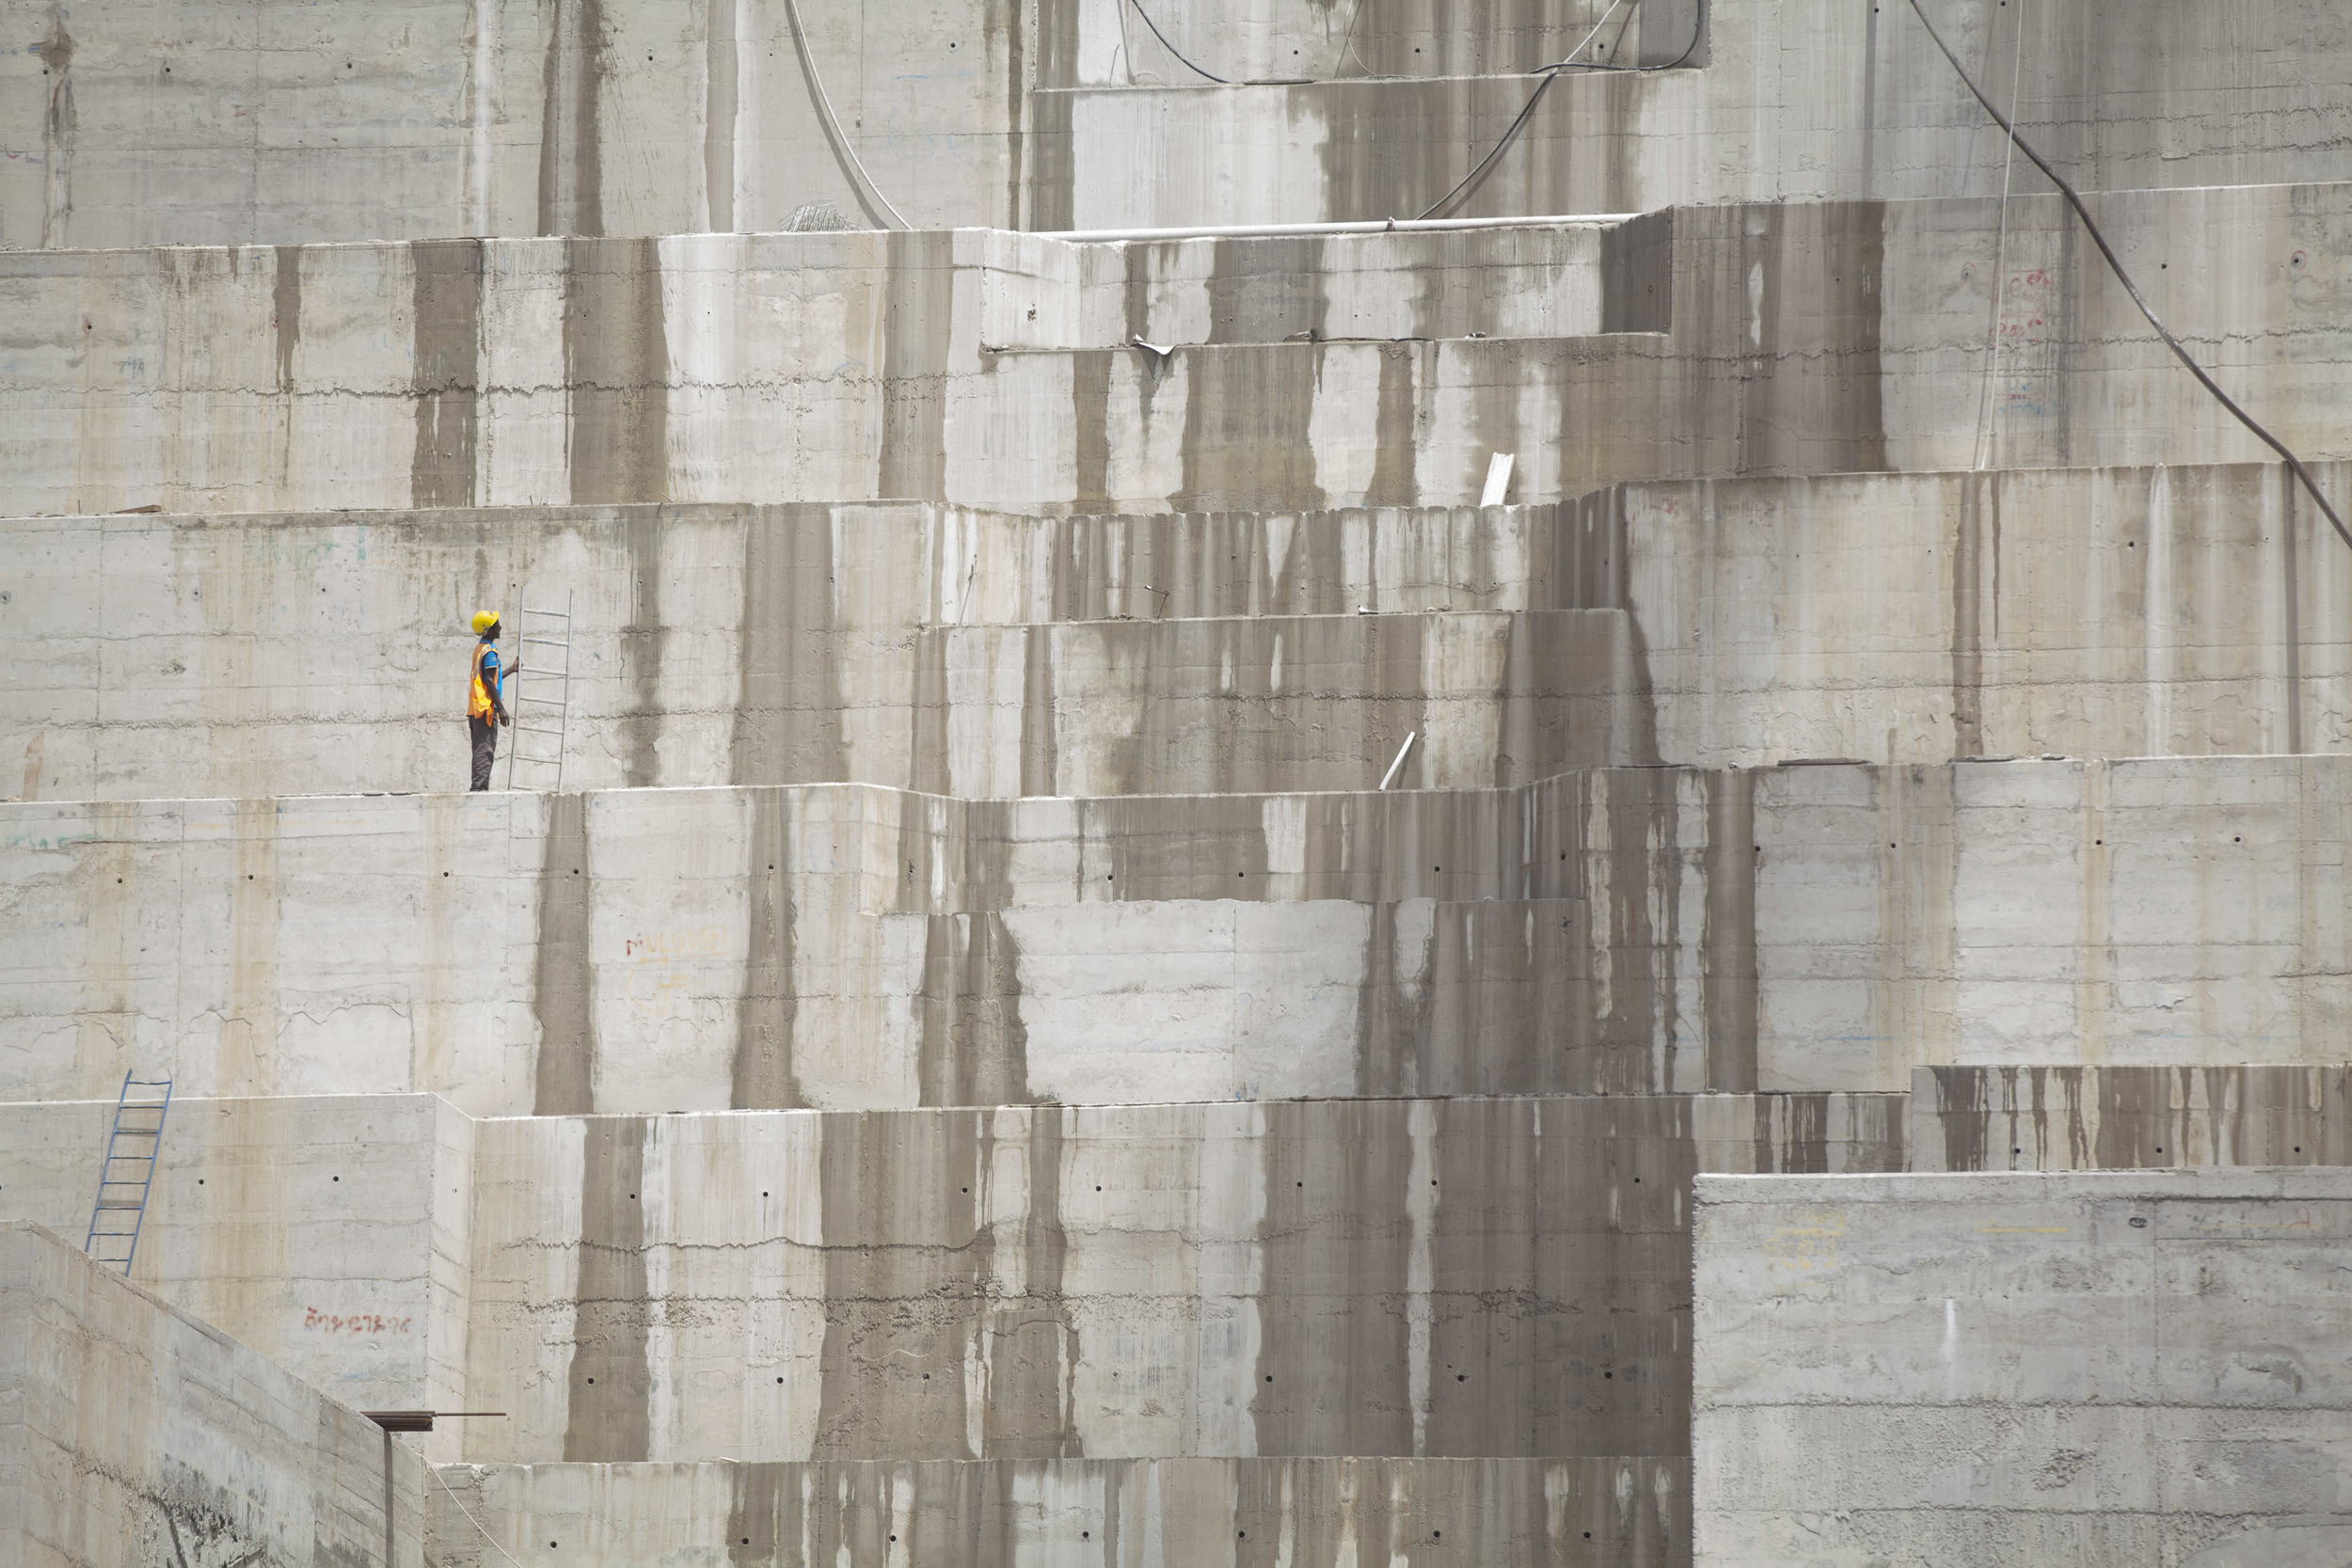  Ethiopian workers are pictured on site at the Great Ethiopian Renaissance Dam on 31 April 2015. Once completed the Ethiopian Dam, and the biggest in Africa will produce around 6000 MW of power, both for export and internal use. AFP Photo / Zacharias